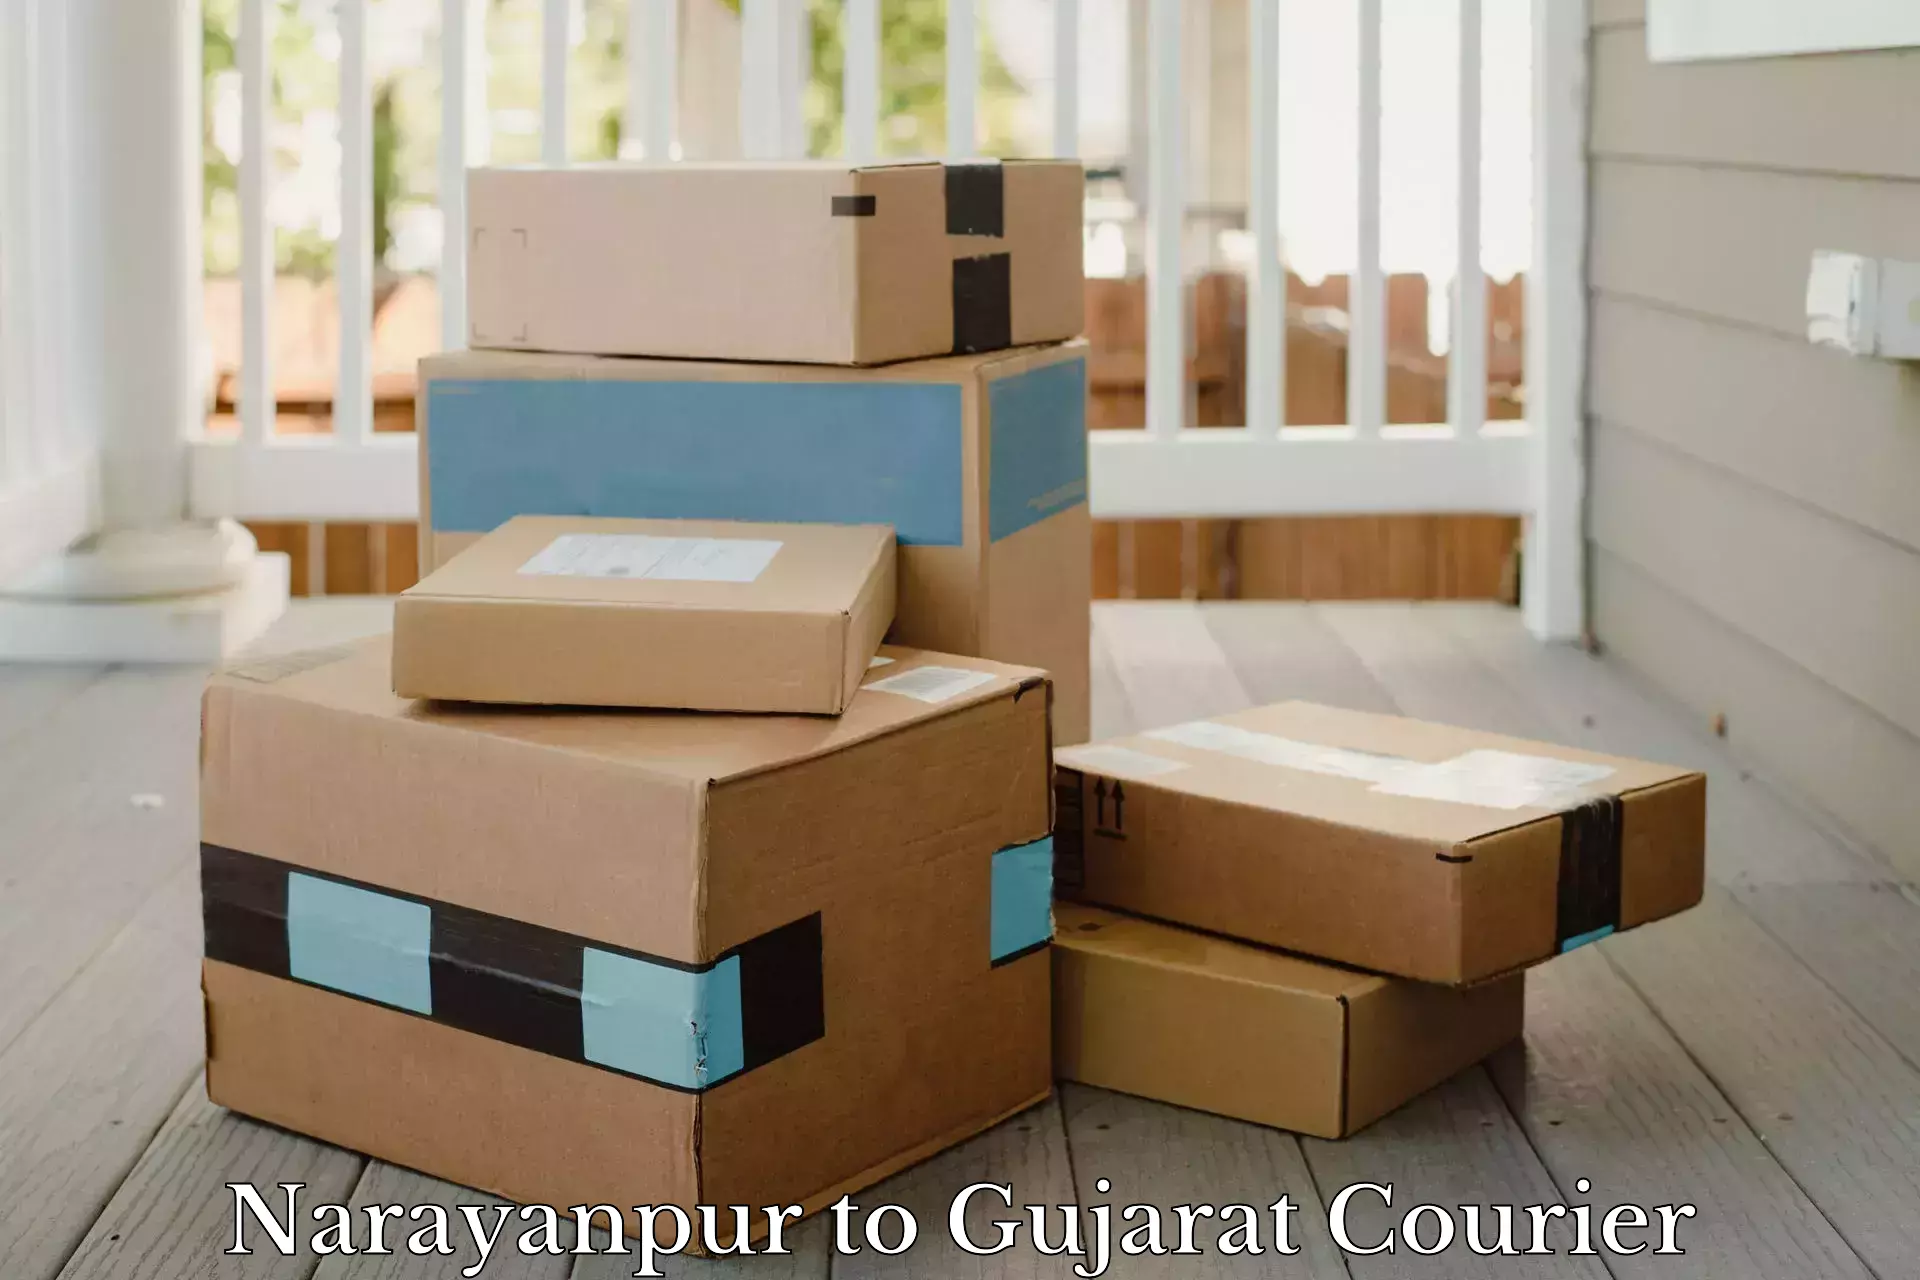 Doorstep delivery service Narayanpur to Gujarat